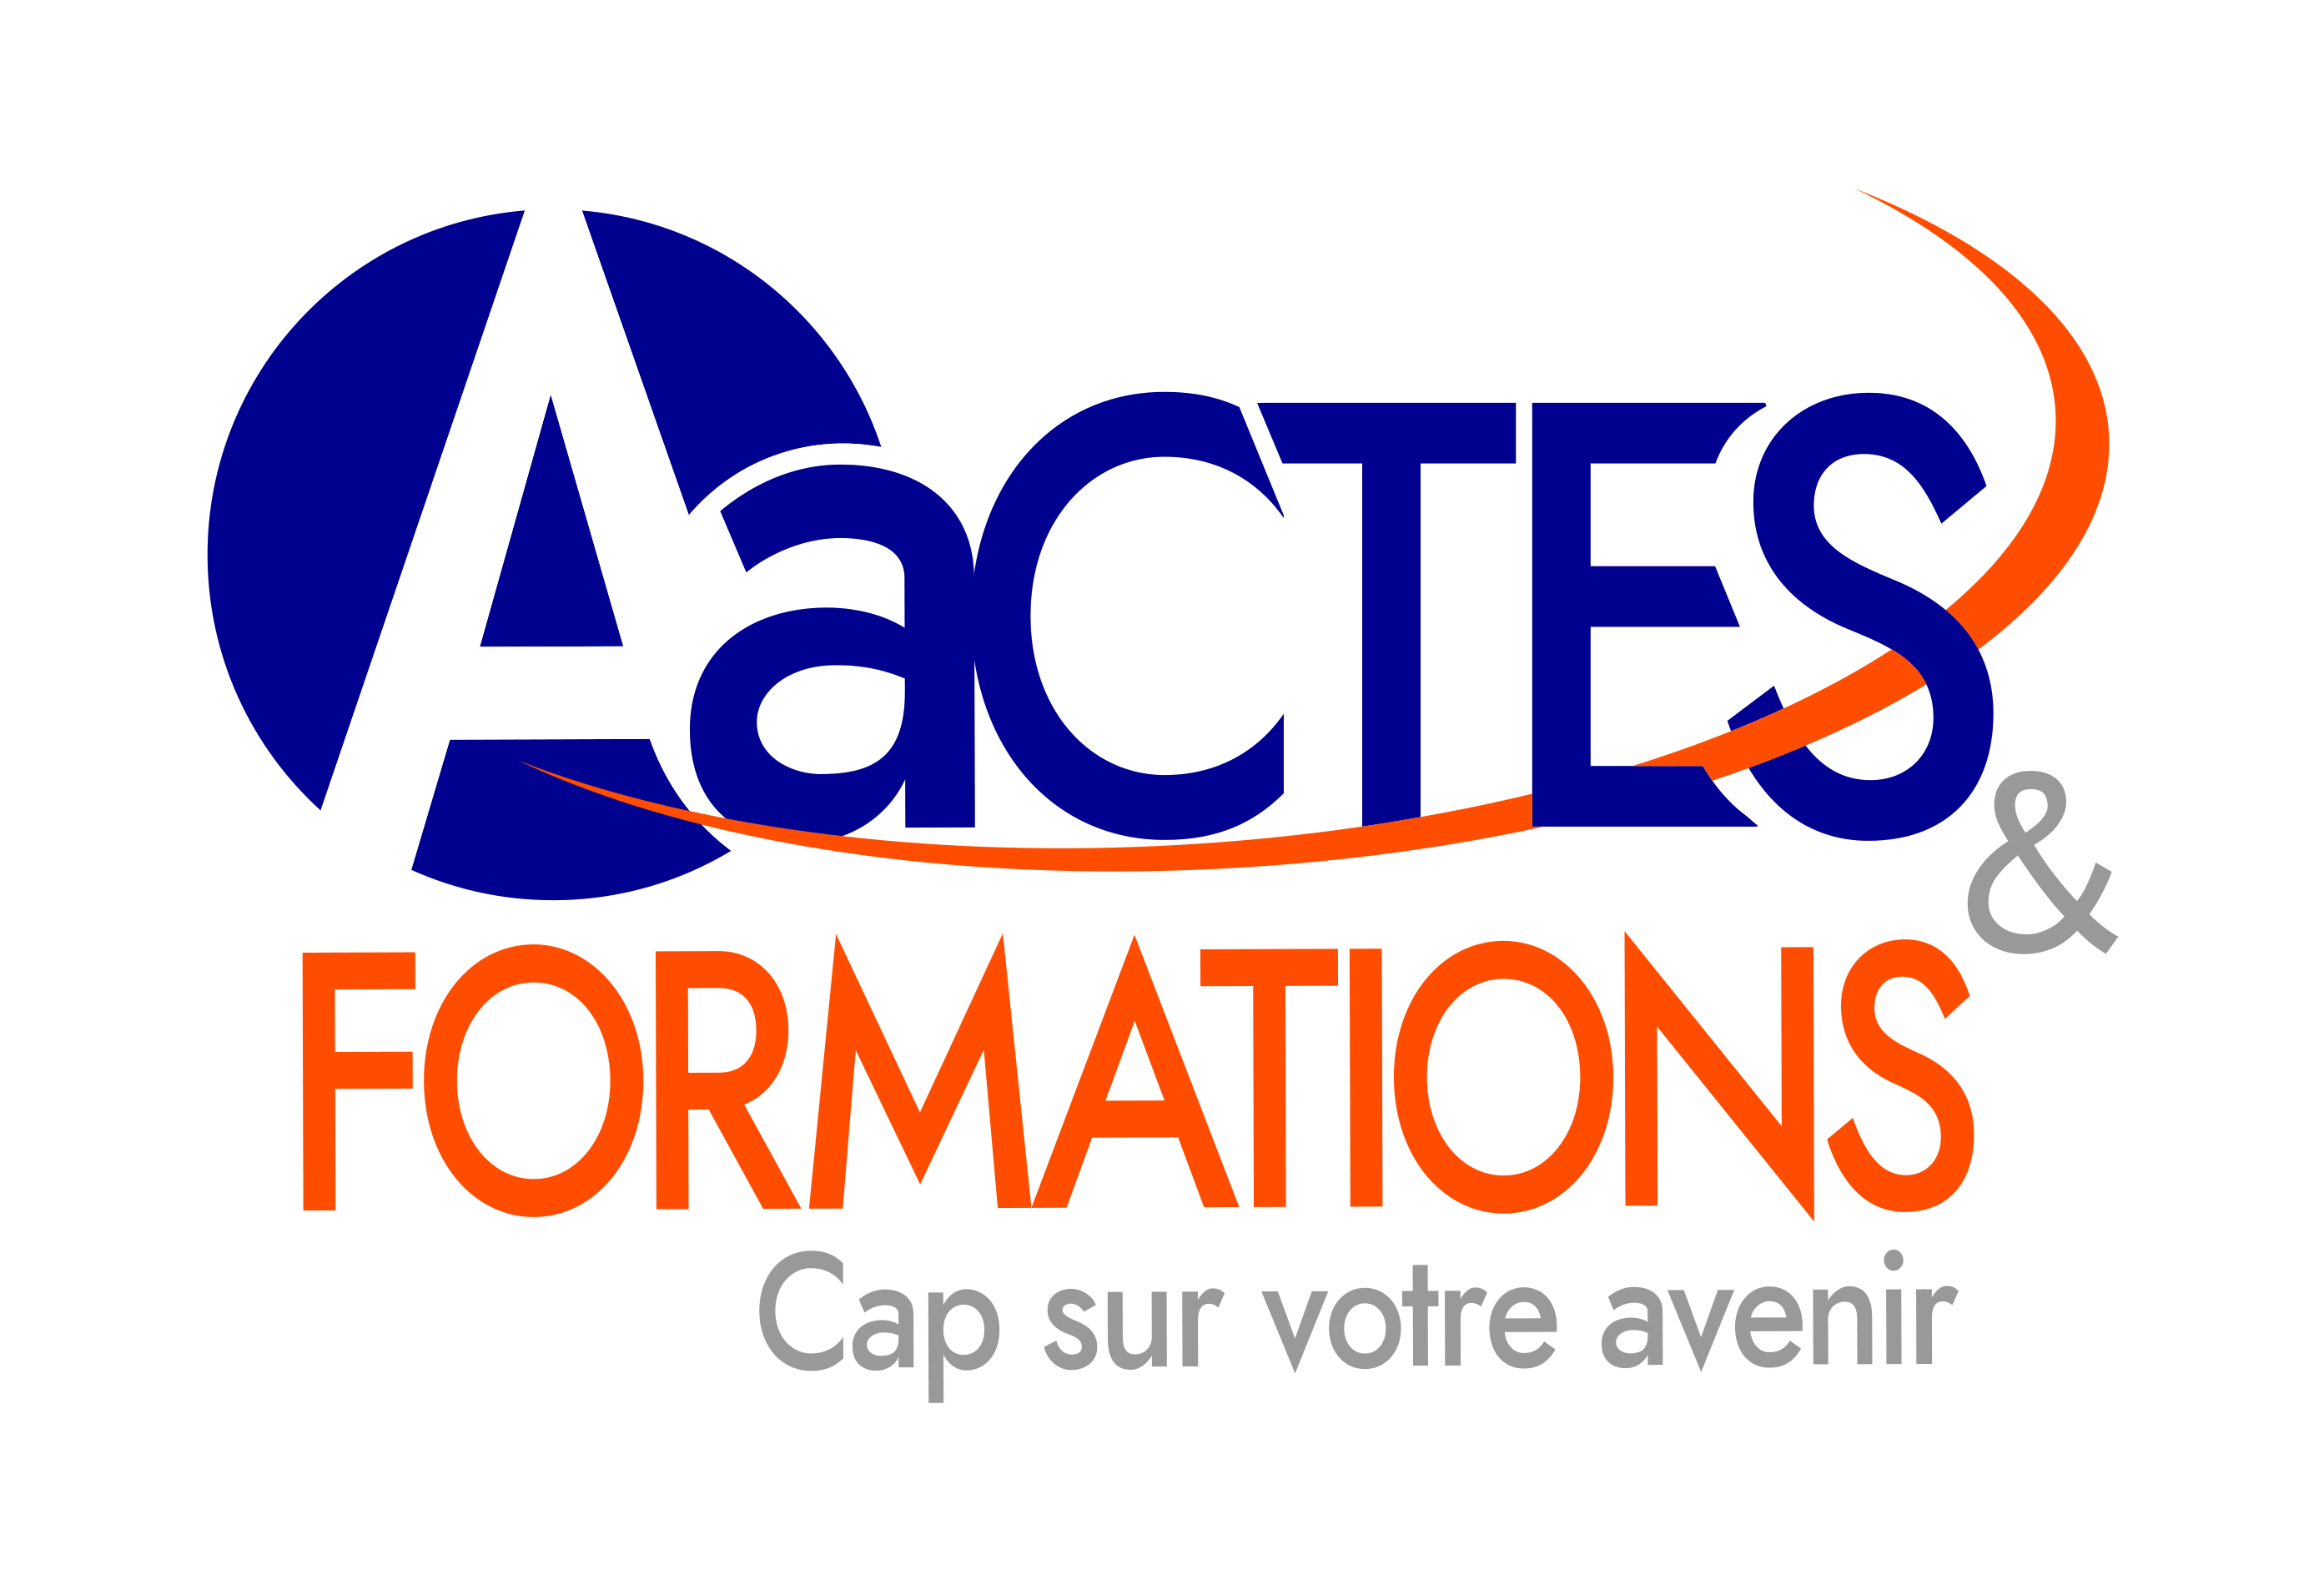 Aactes&Formations